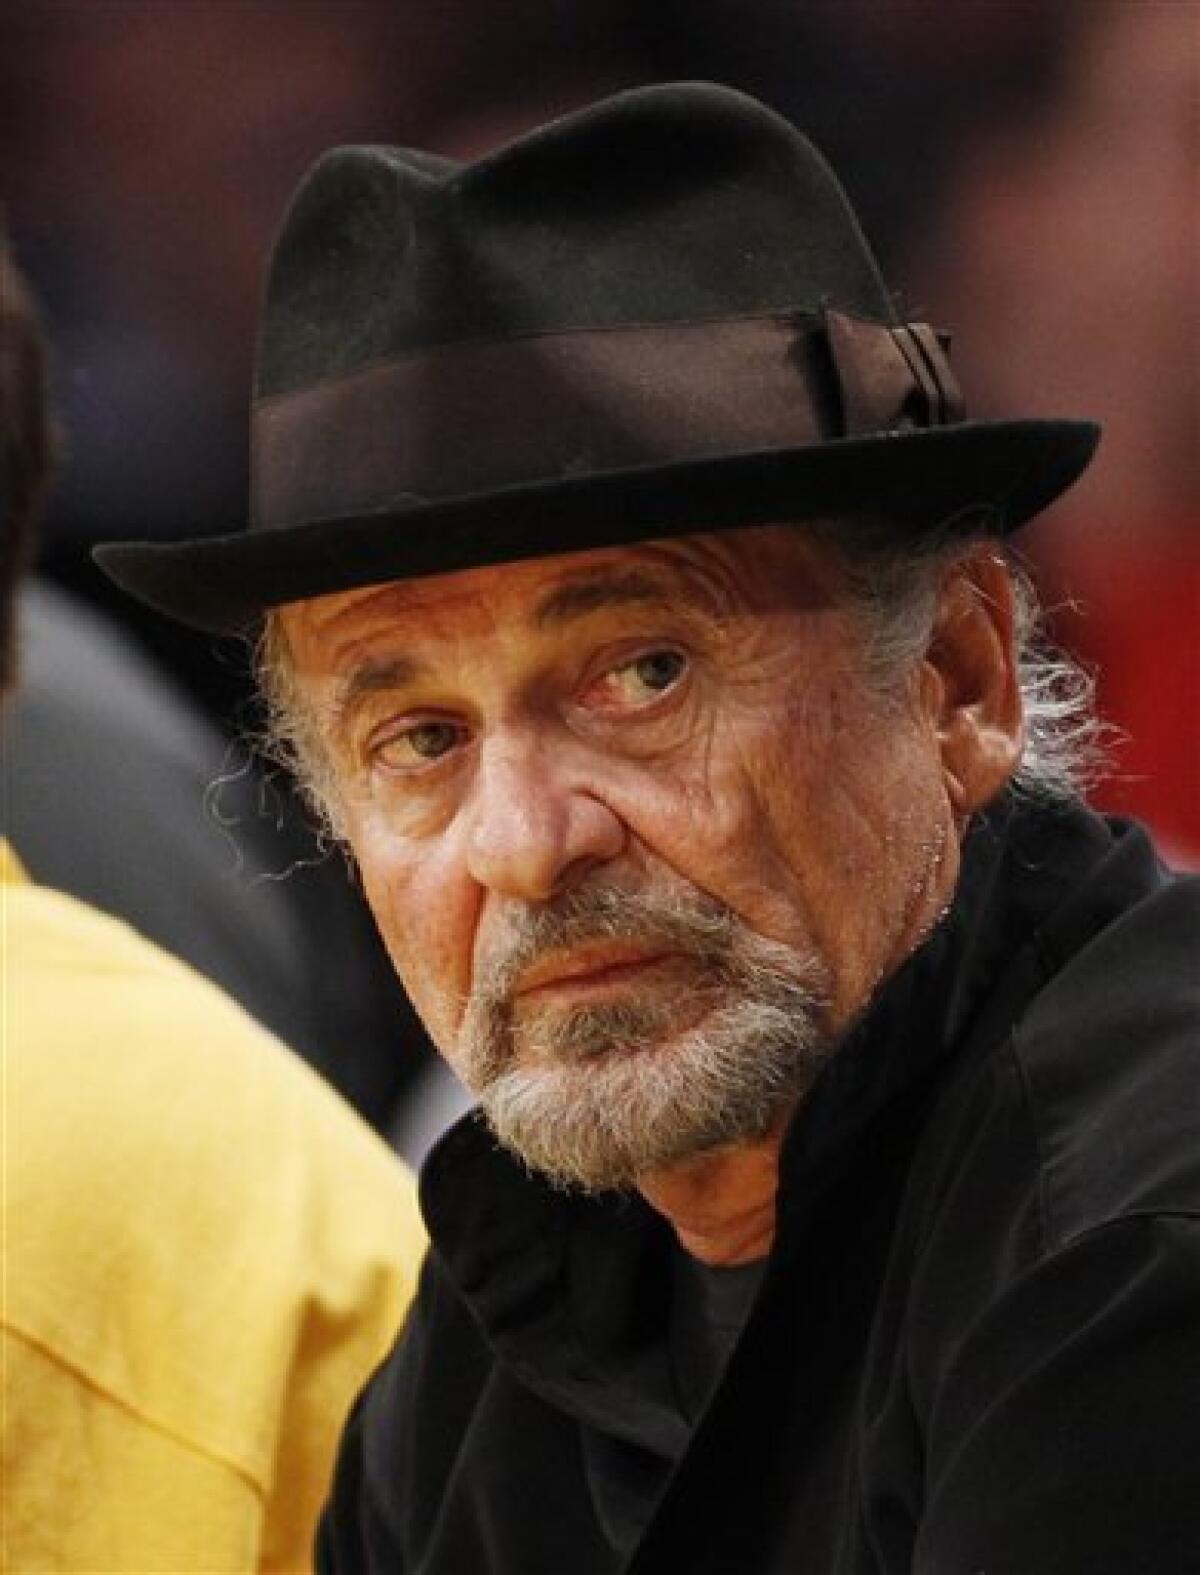 FILE - In this March 23, 2012 file photo, actor Joe Pesci sits court-side at the NBA basketball game between the Portland Trail Blazers and Los Angeles Lakers, in Los Angeles. An attorney for Pesci said Monday Feb. 4, 2013, that the Oscar-winning actor had settled a $3 million lawsuit against the makers of a planned biopic on the Gotti crime family for undisclosed terms. (AP Photo/Danny Moloshok, File)